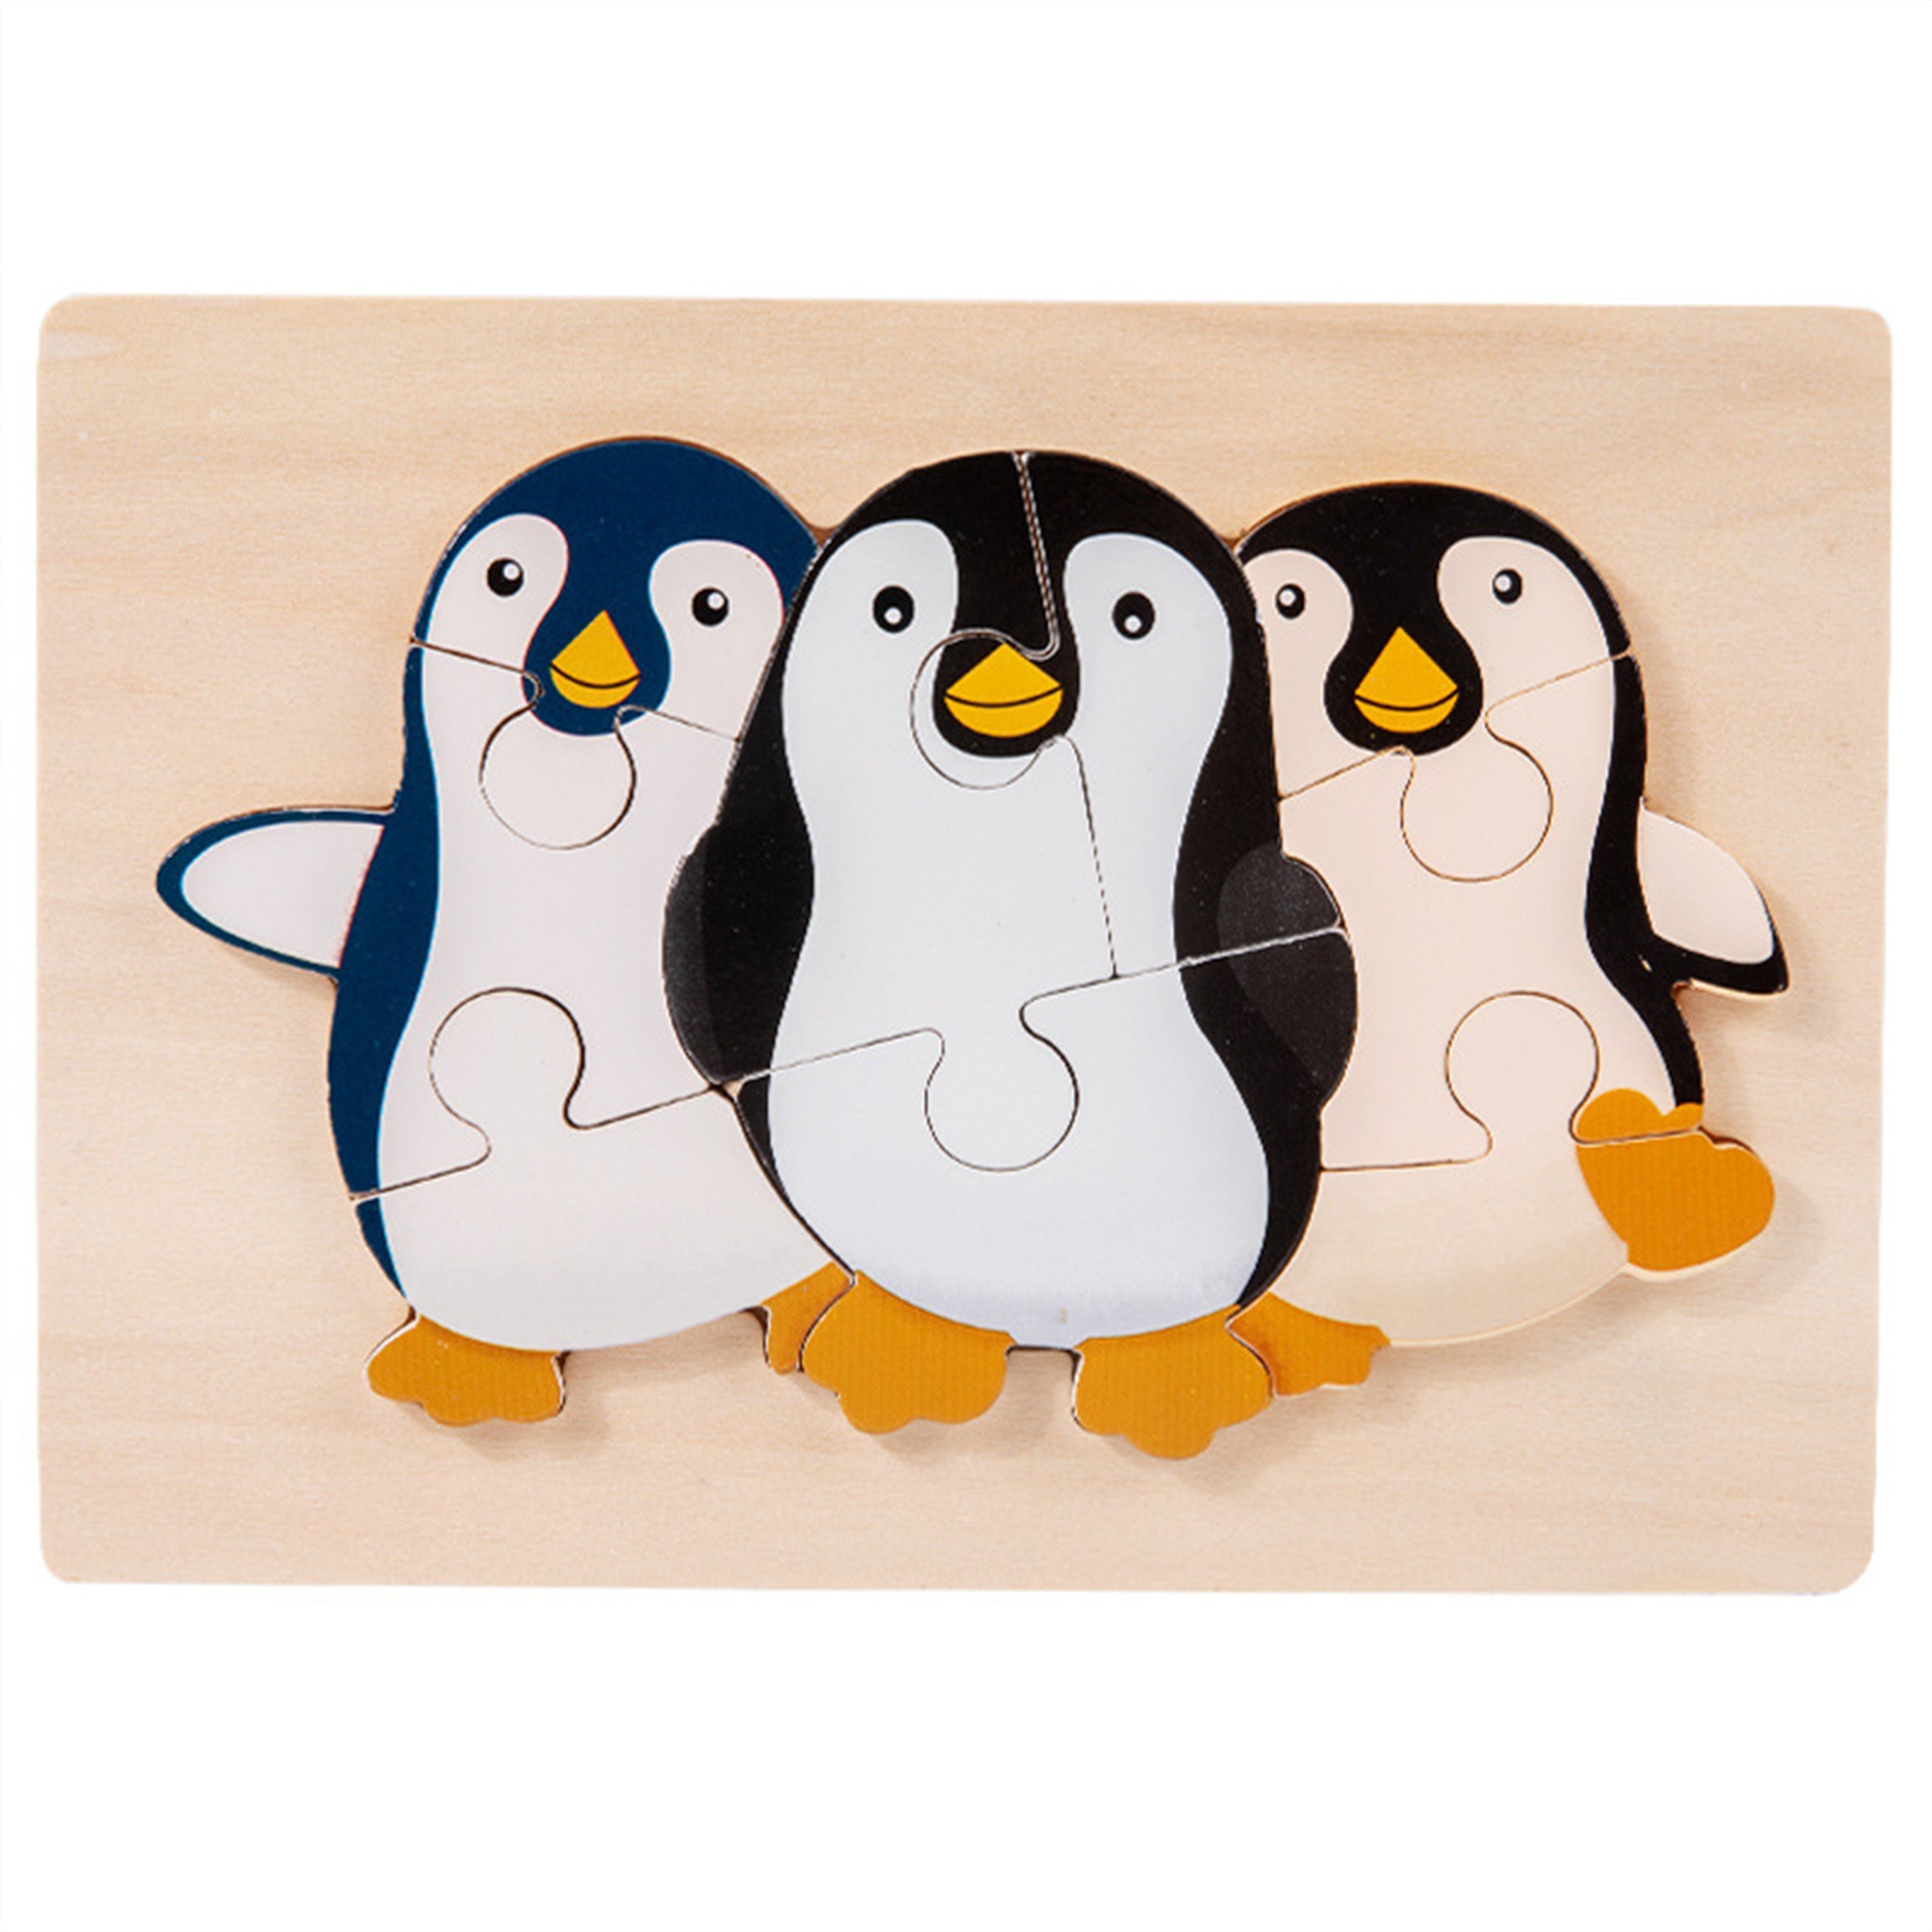 Montessori Educational Animal Family Wooden Puzzle - Fun Learning Activity for Kids